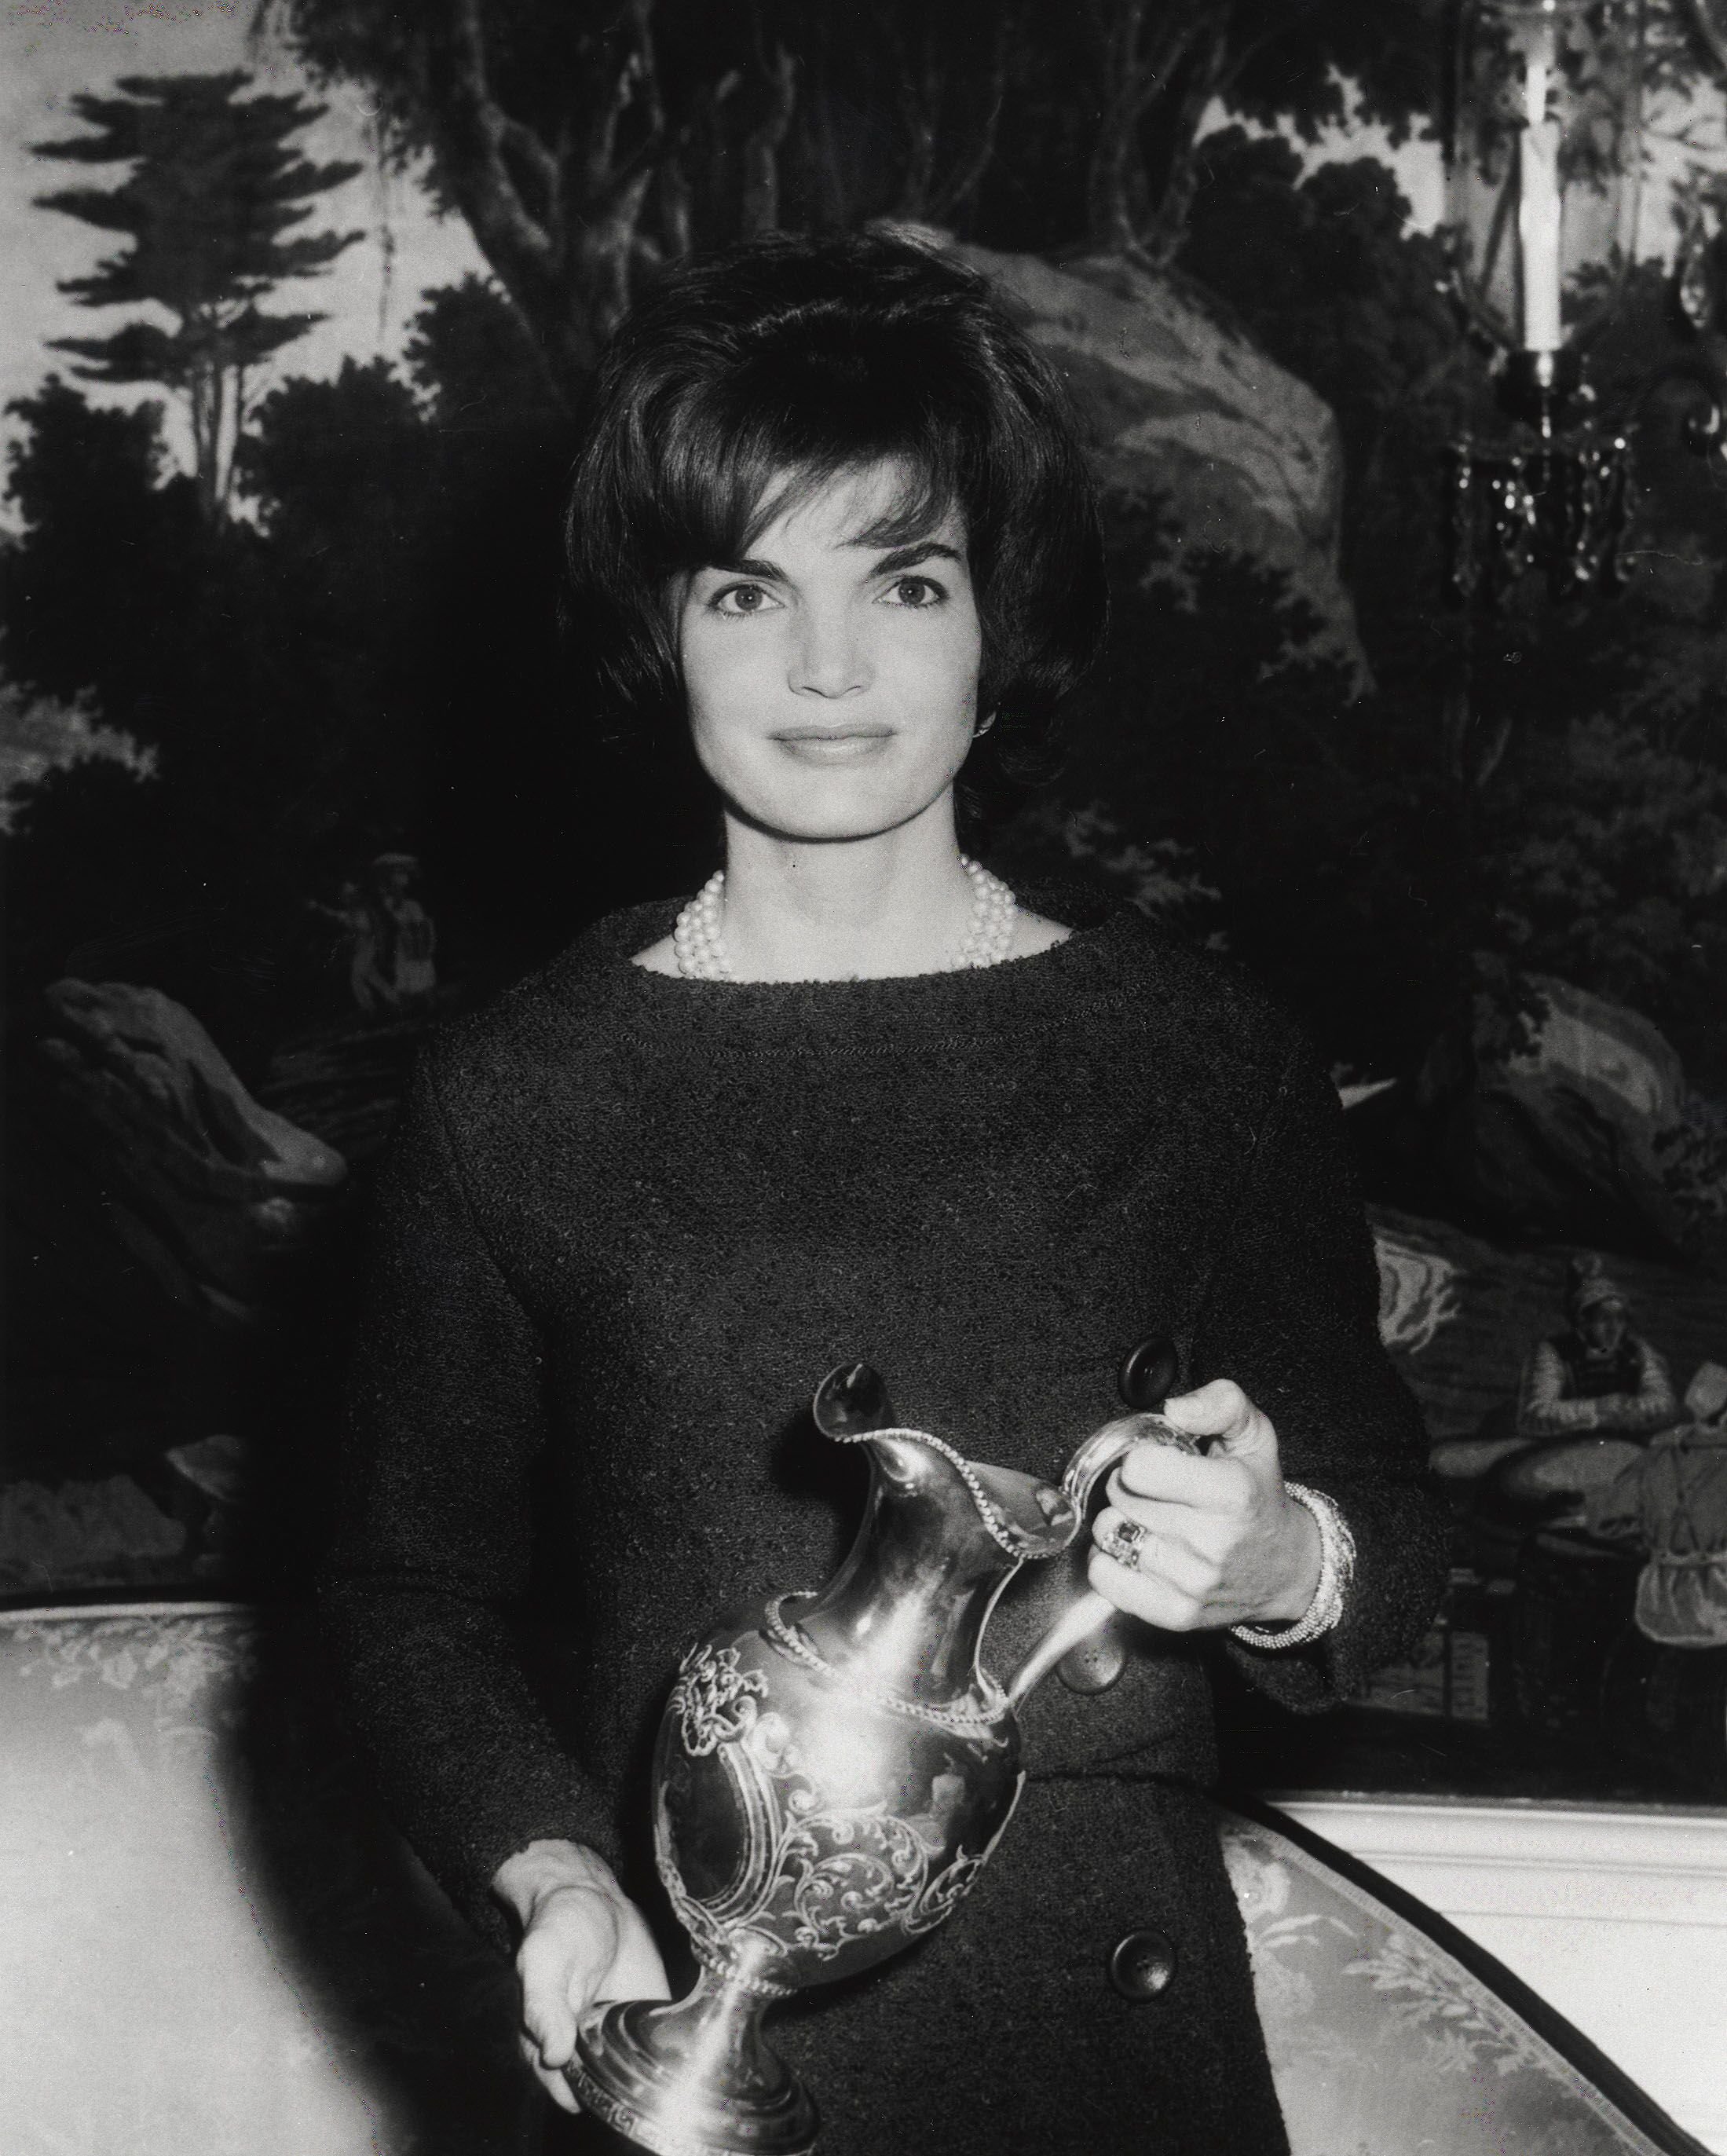 Jacqueline "Jackie" Kennedy posing for a photograph while holding a gift in 1961 at the White House in Washington, D.C. | Photo: Getty Images